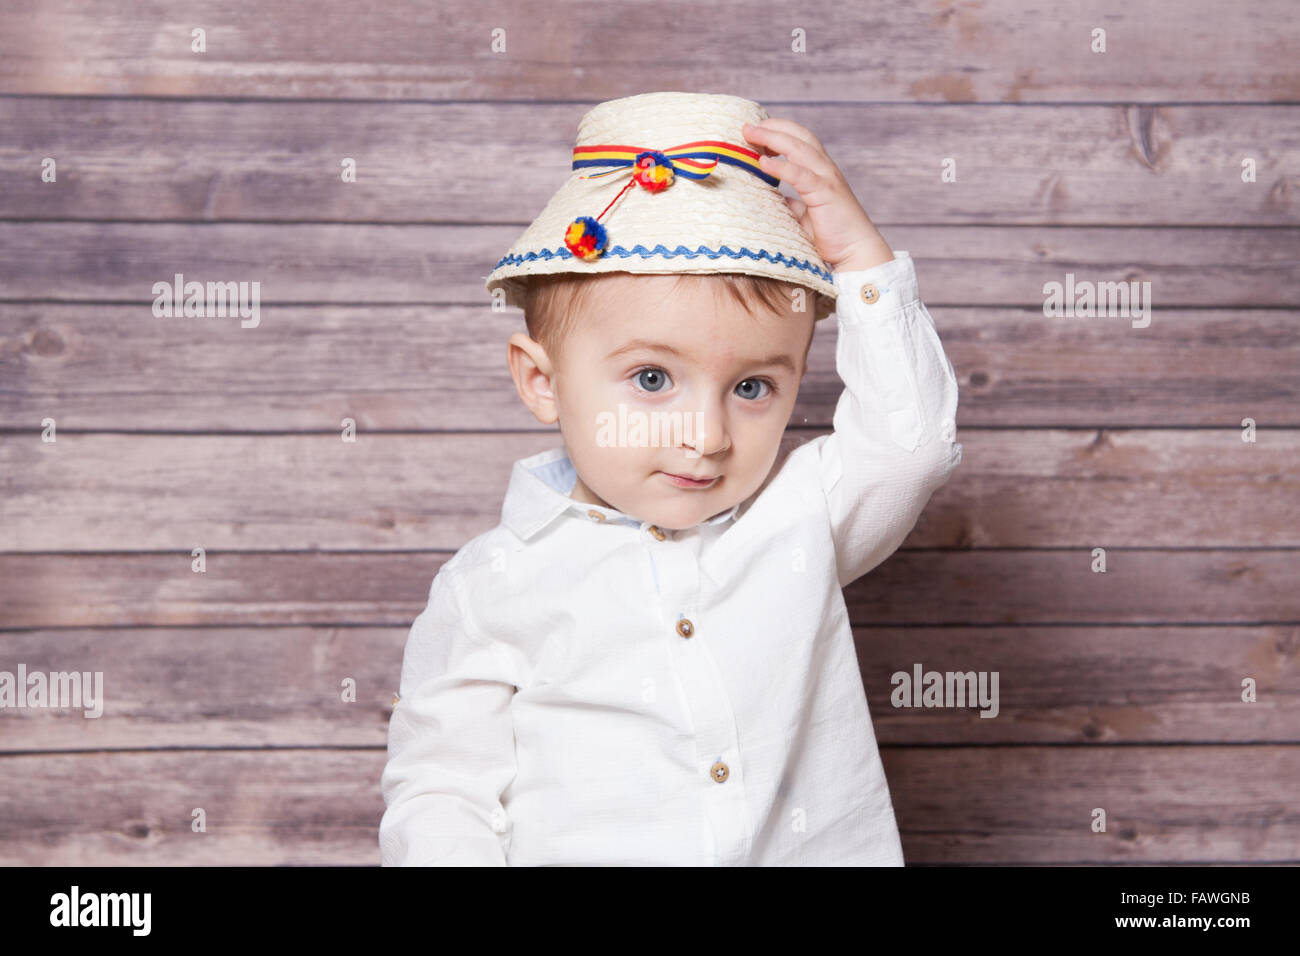 Portrait of a 1 year old baby boy wearing a Romanian traditional